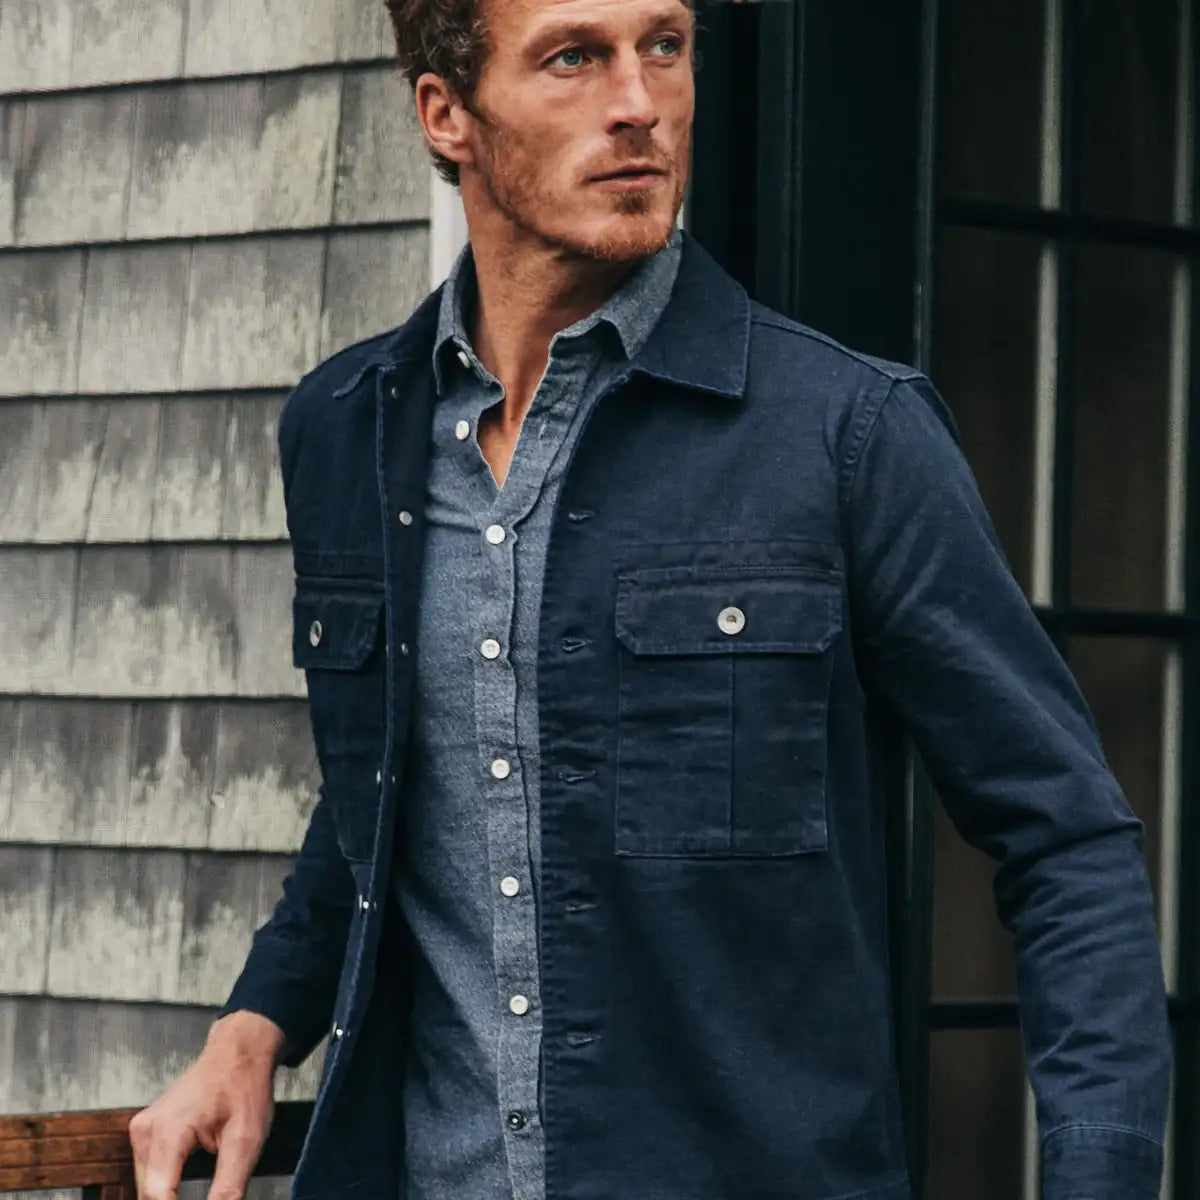 Taylor Stitch - TAYLOR STITCH THE HBT JACKET IN WASHED NAVY - Rent With Thred